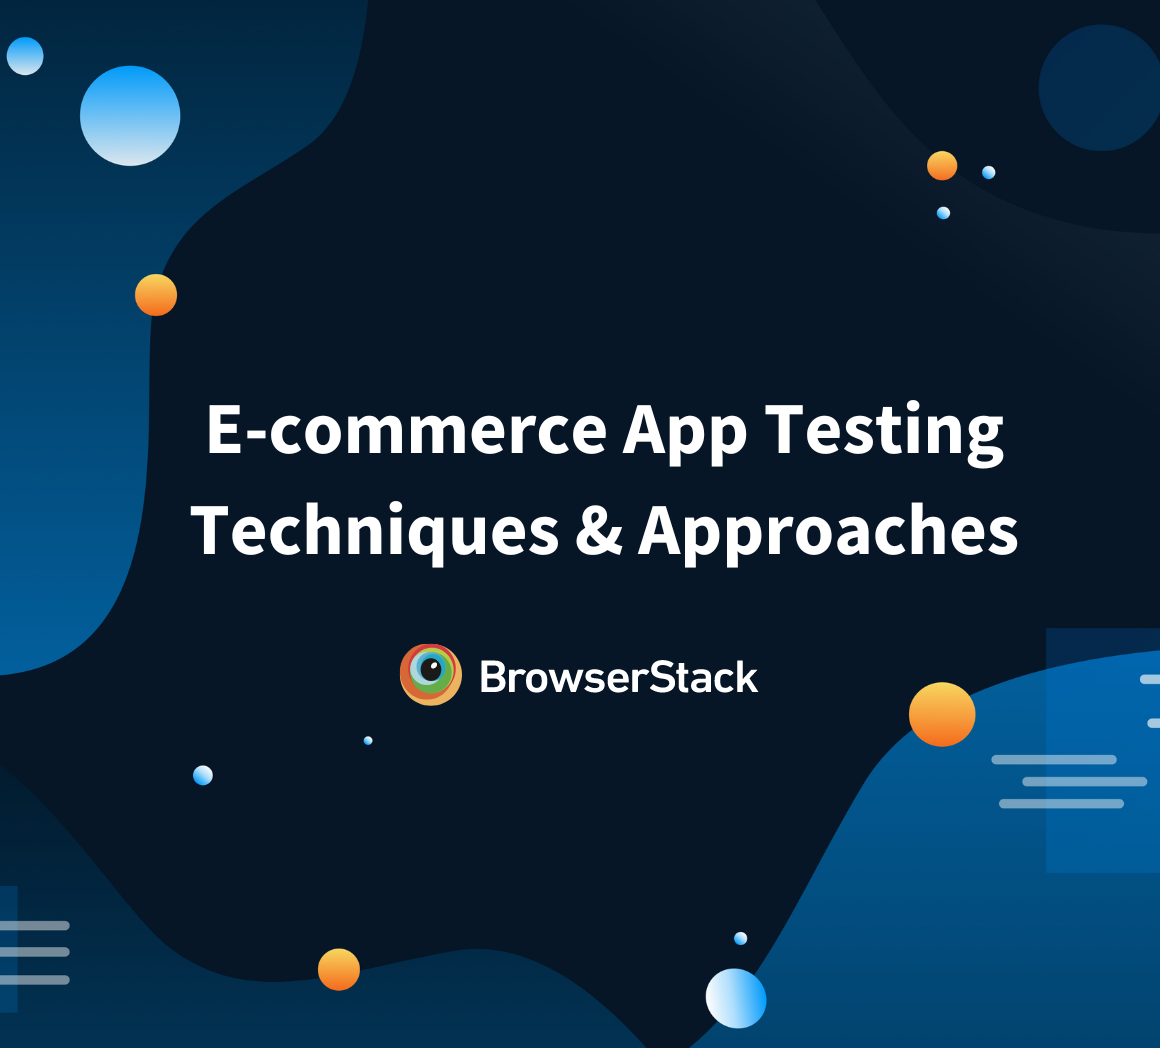 E-commerce App Testing Techniques and Approaches